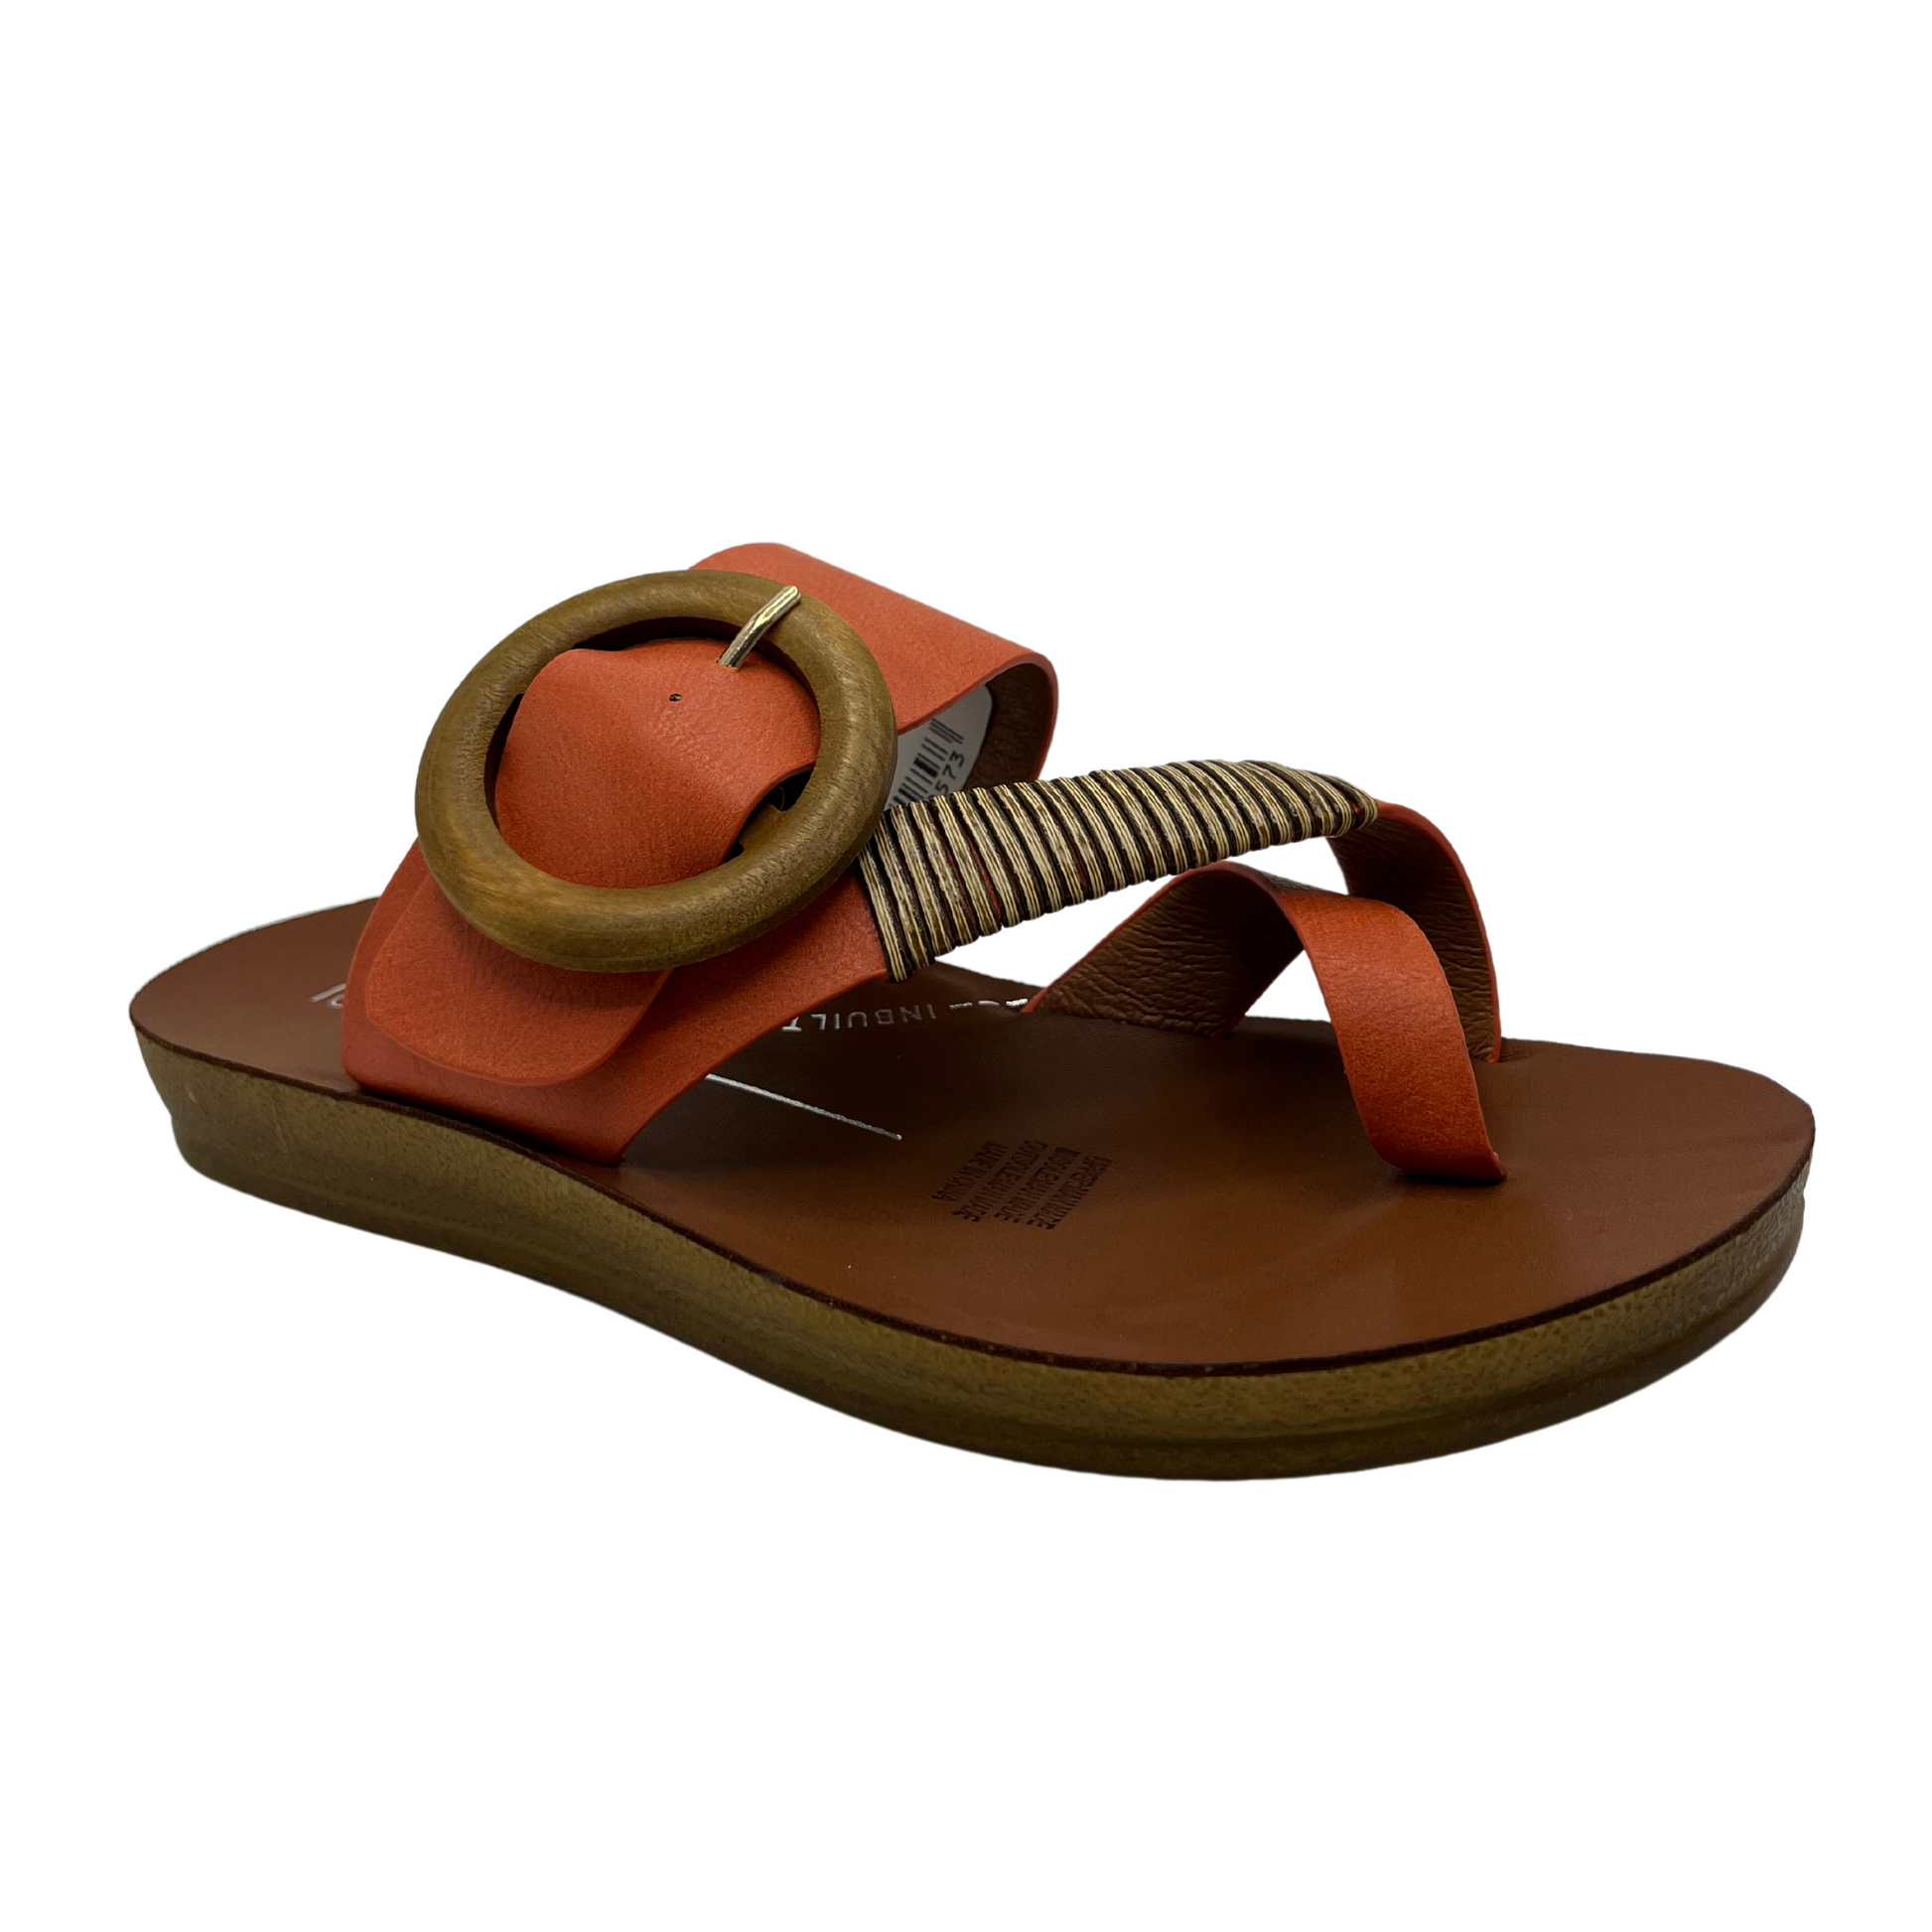 45 degree angled view of orange strapped slip on sandal. Featuring a wooden buckle and bamboo wrap on the toe strap.